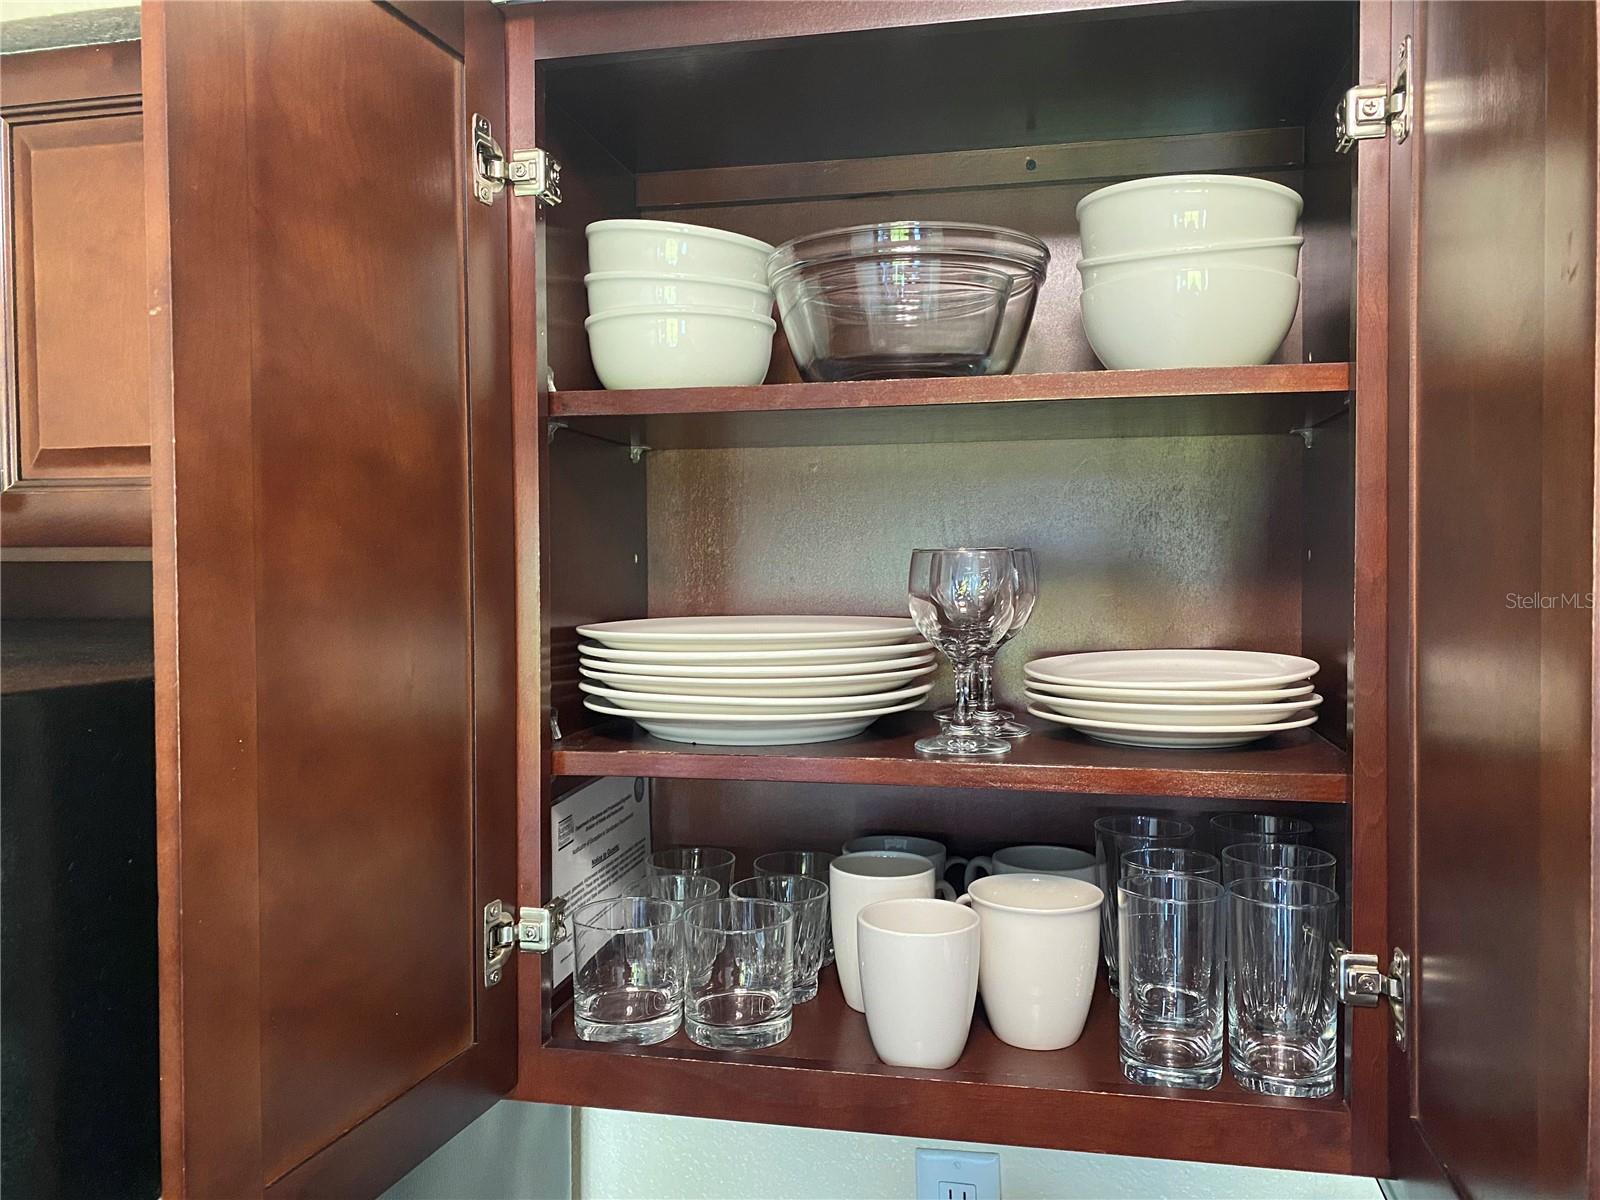 The kitchen is fully stocked with dishes and glassware